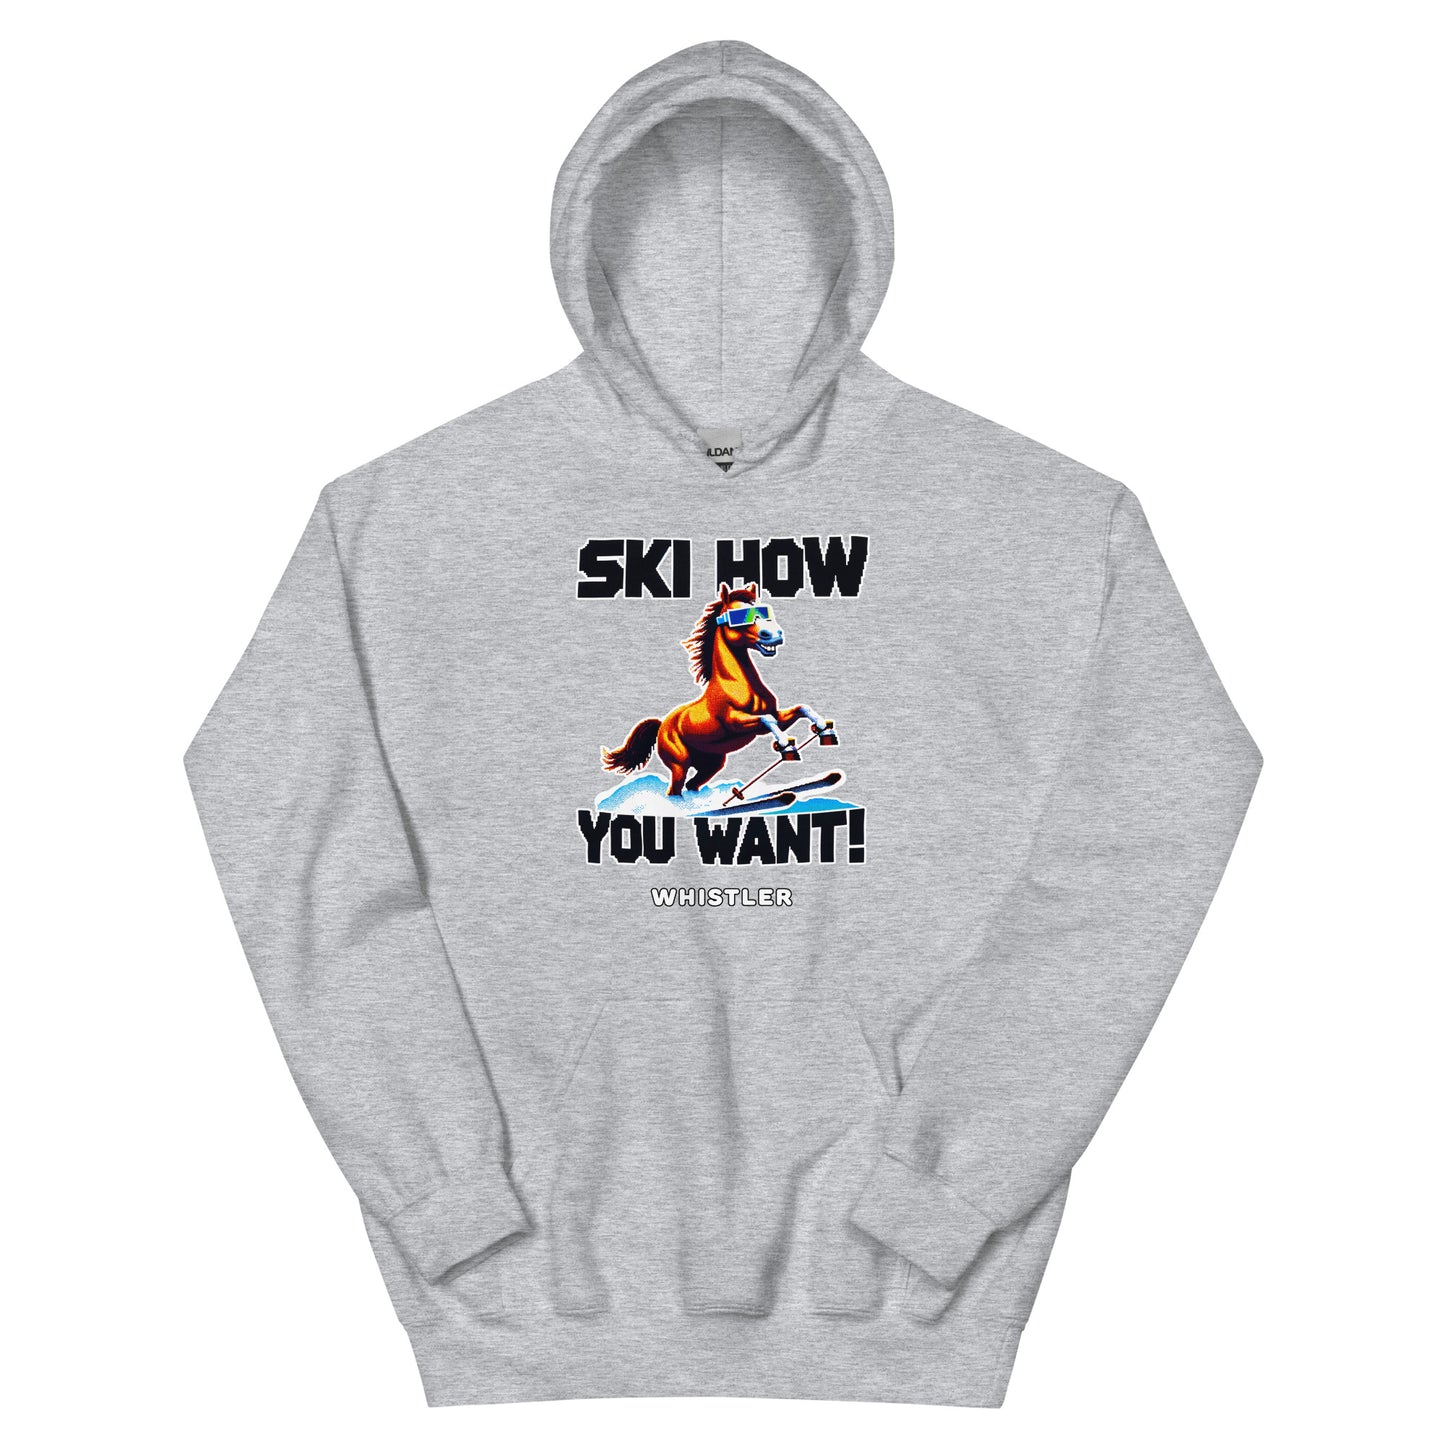 Ski how you want Whistler horse skiing printed hoodie by Whistler Shirts